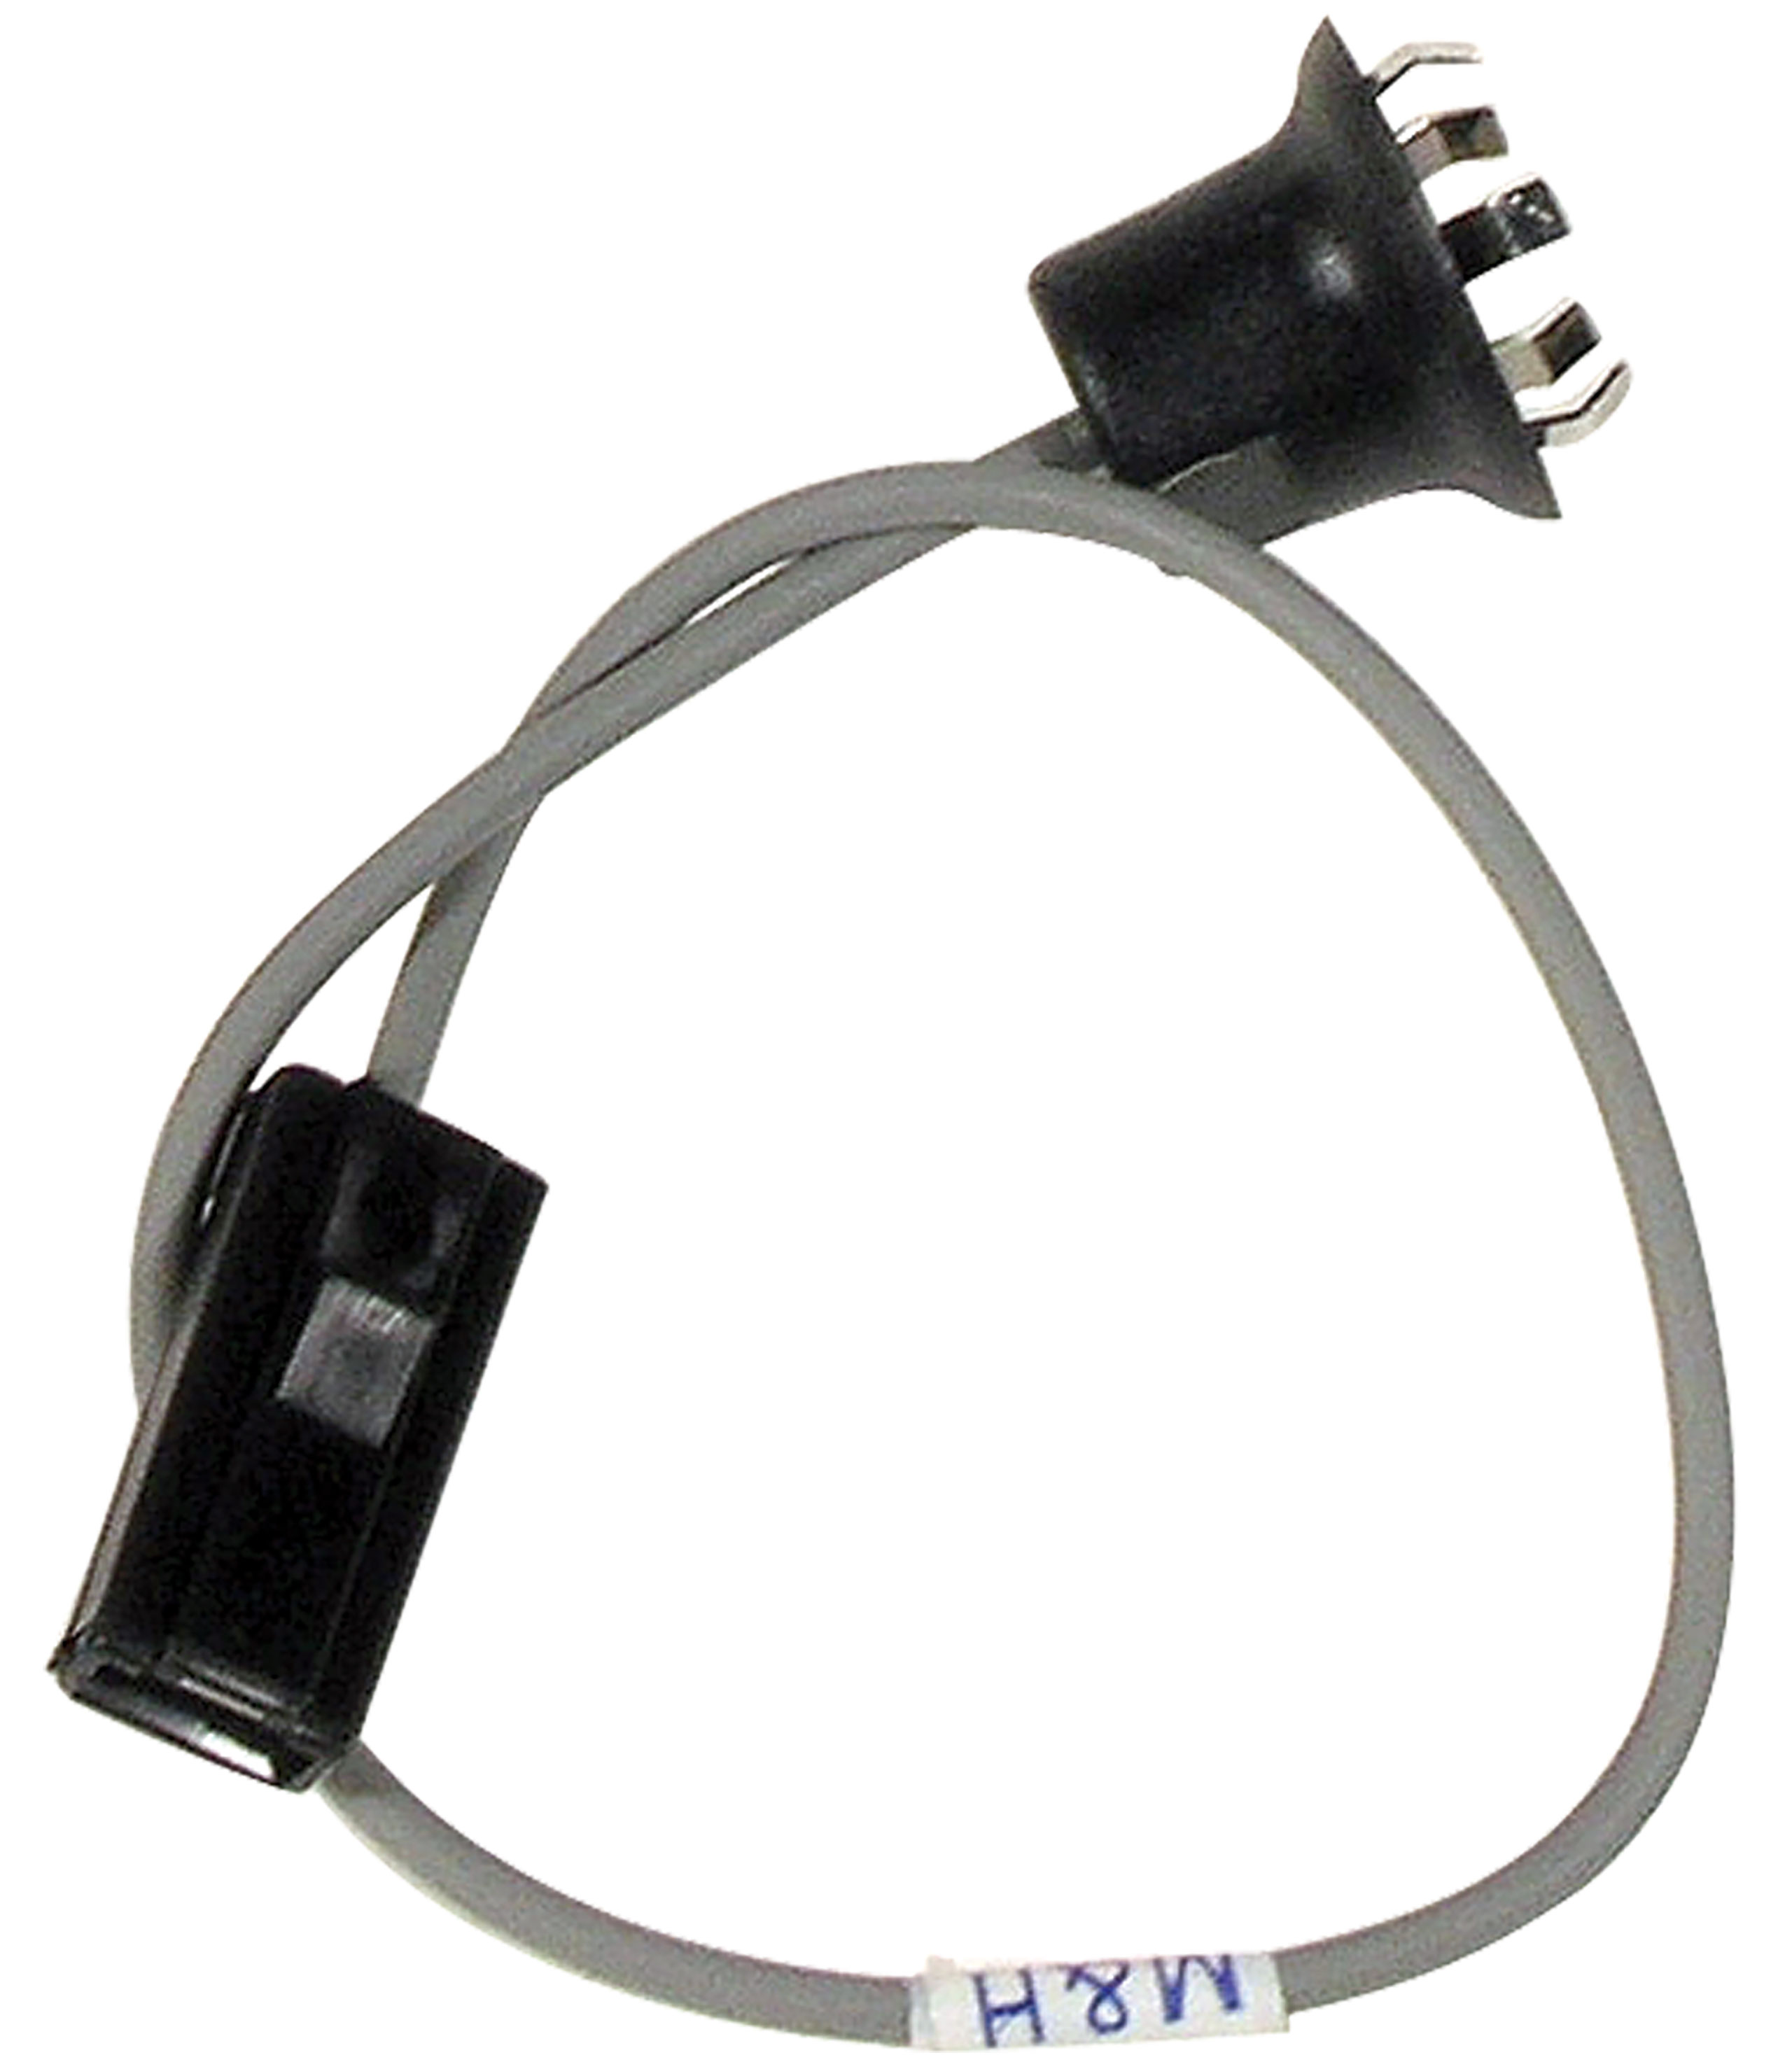 C3 1971-1975 Chevrolet Corvette Harness. Shift Indicator Lamp On Console - Automatic - Lectric Limited, Inc.